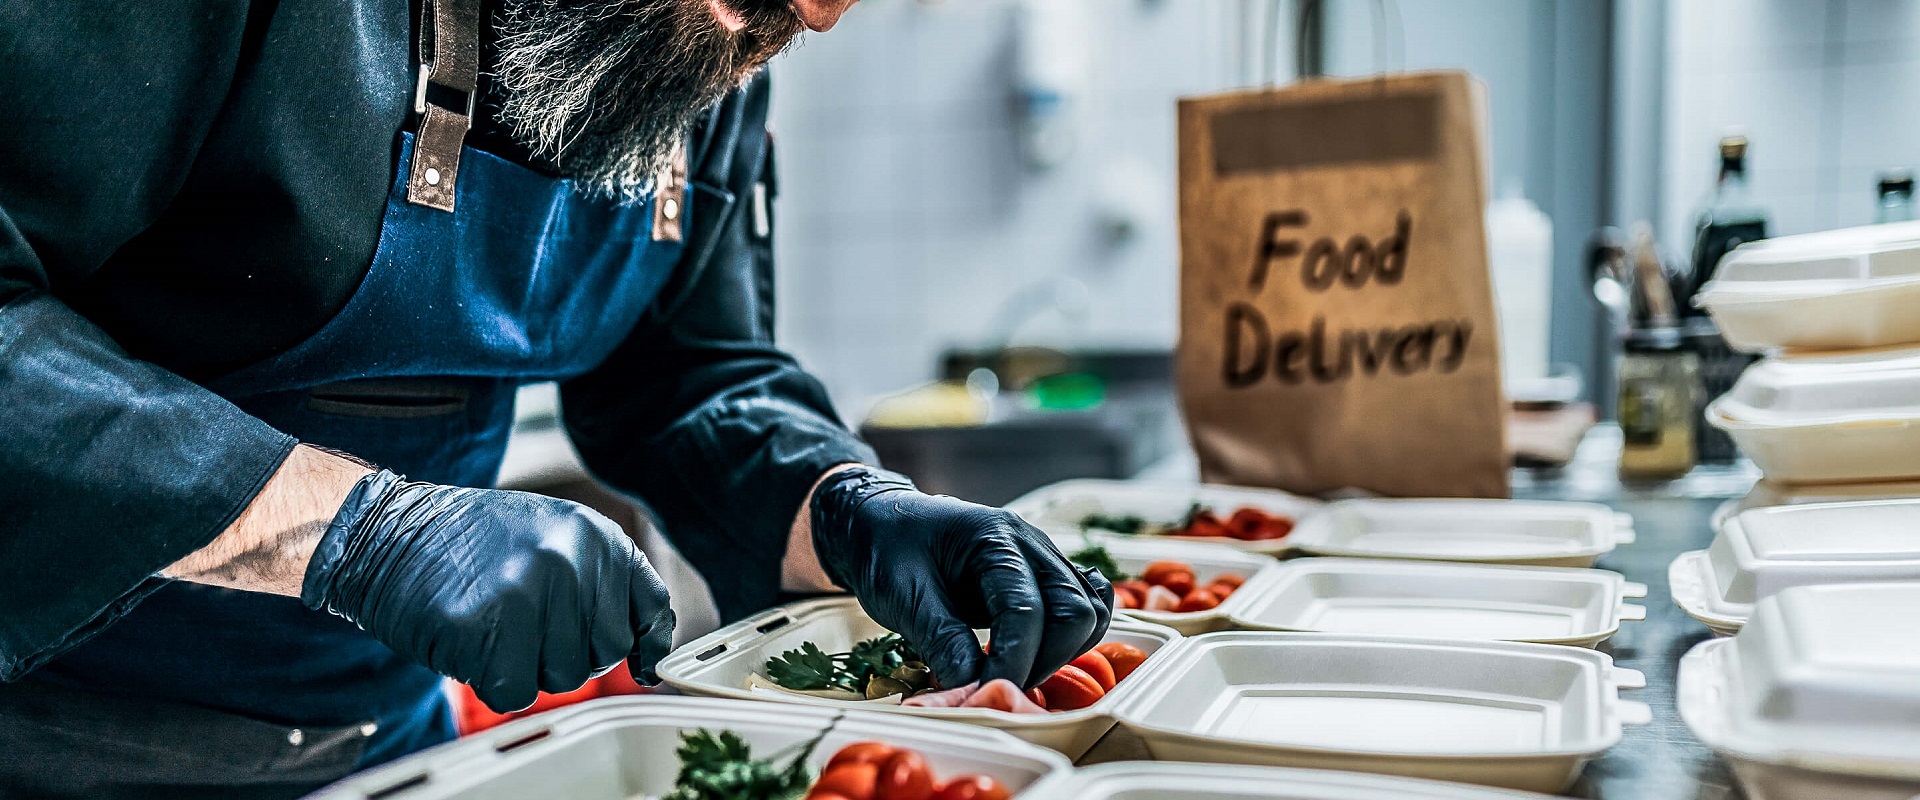 Chef prepares dishes for food delivery 